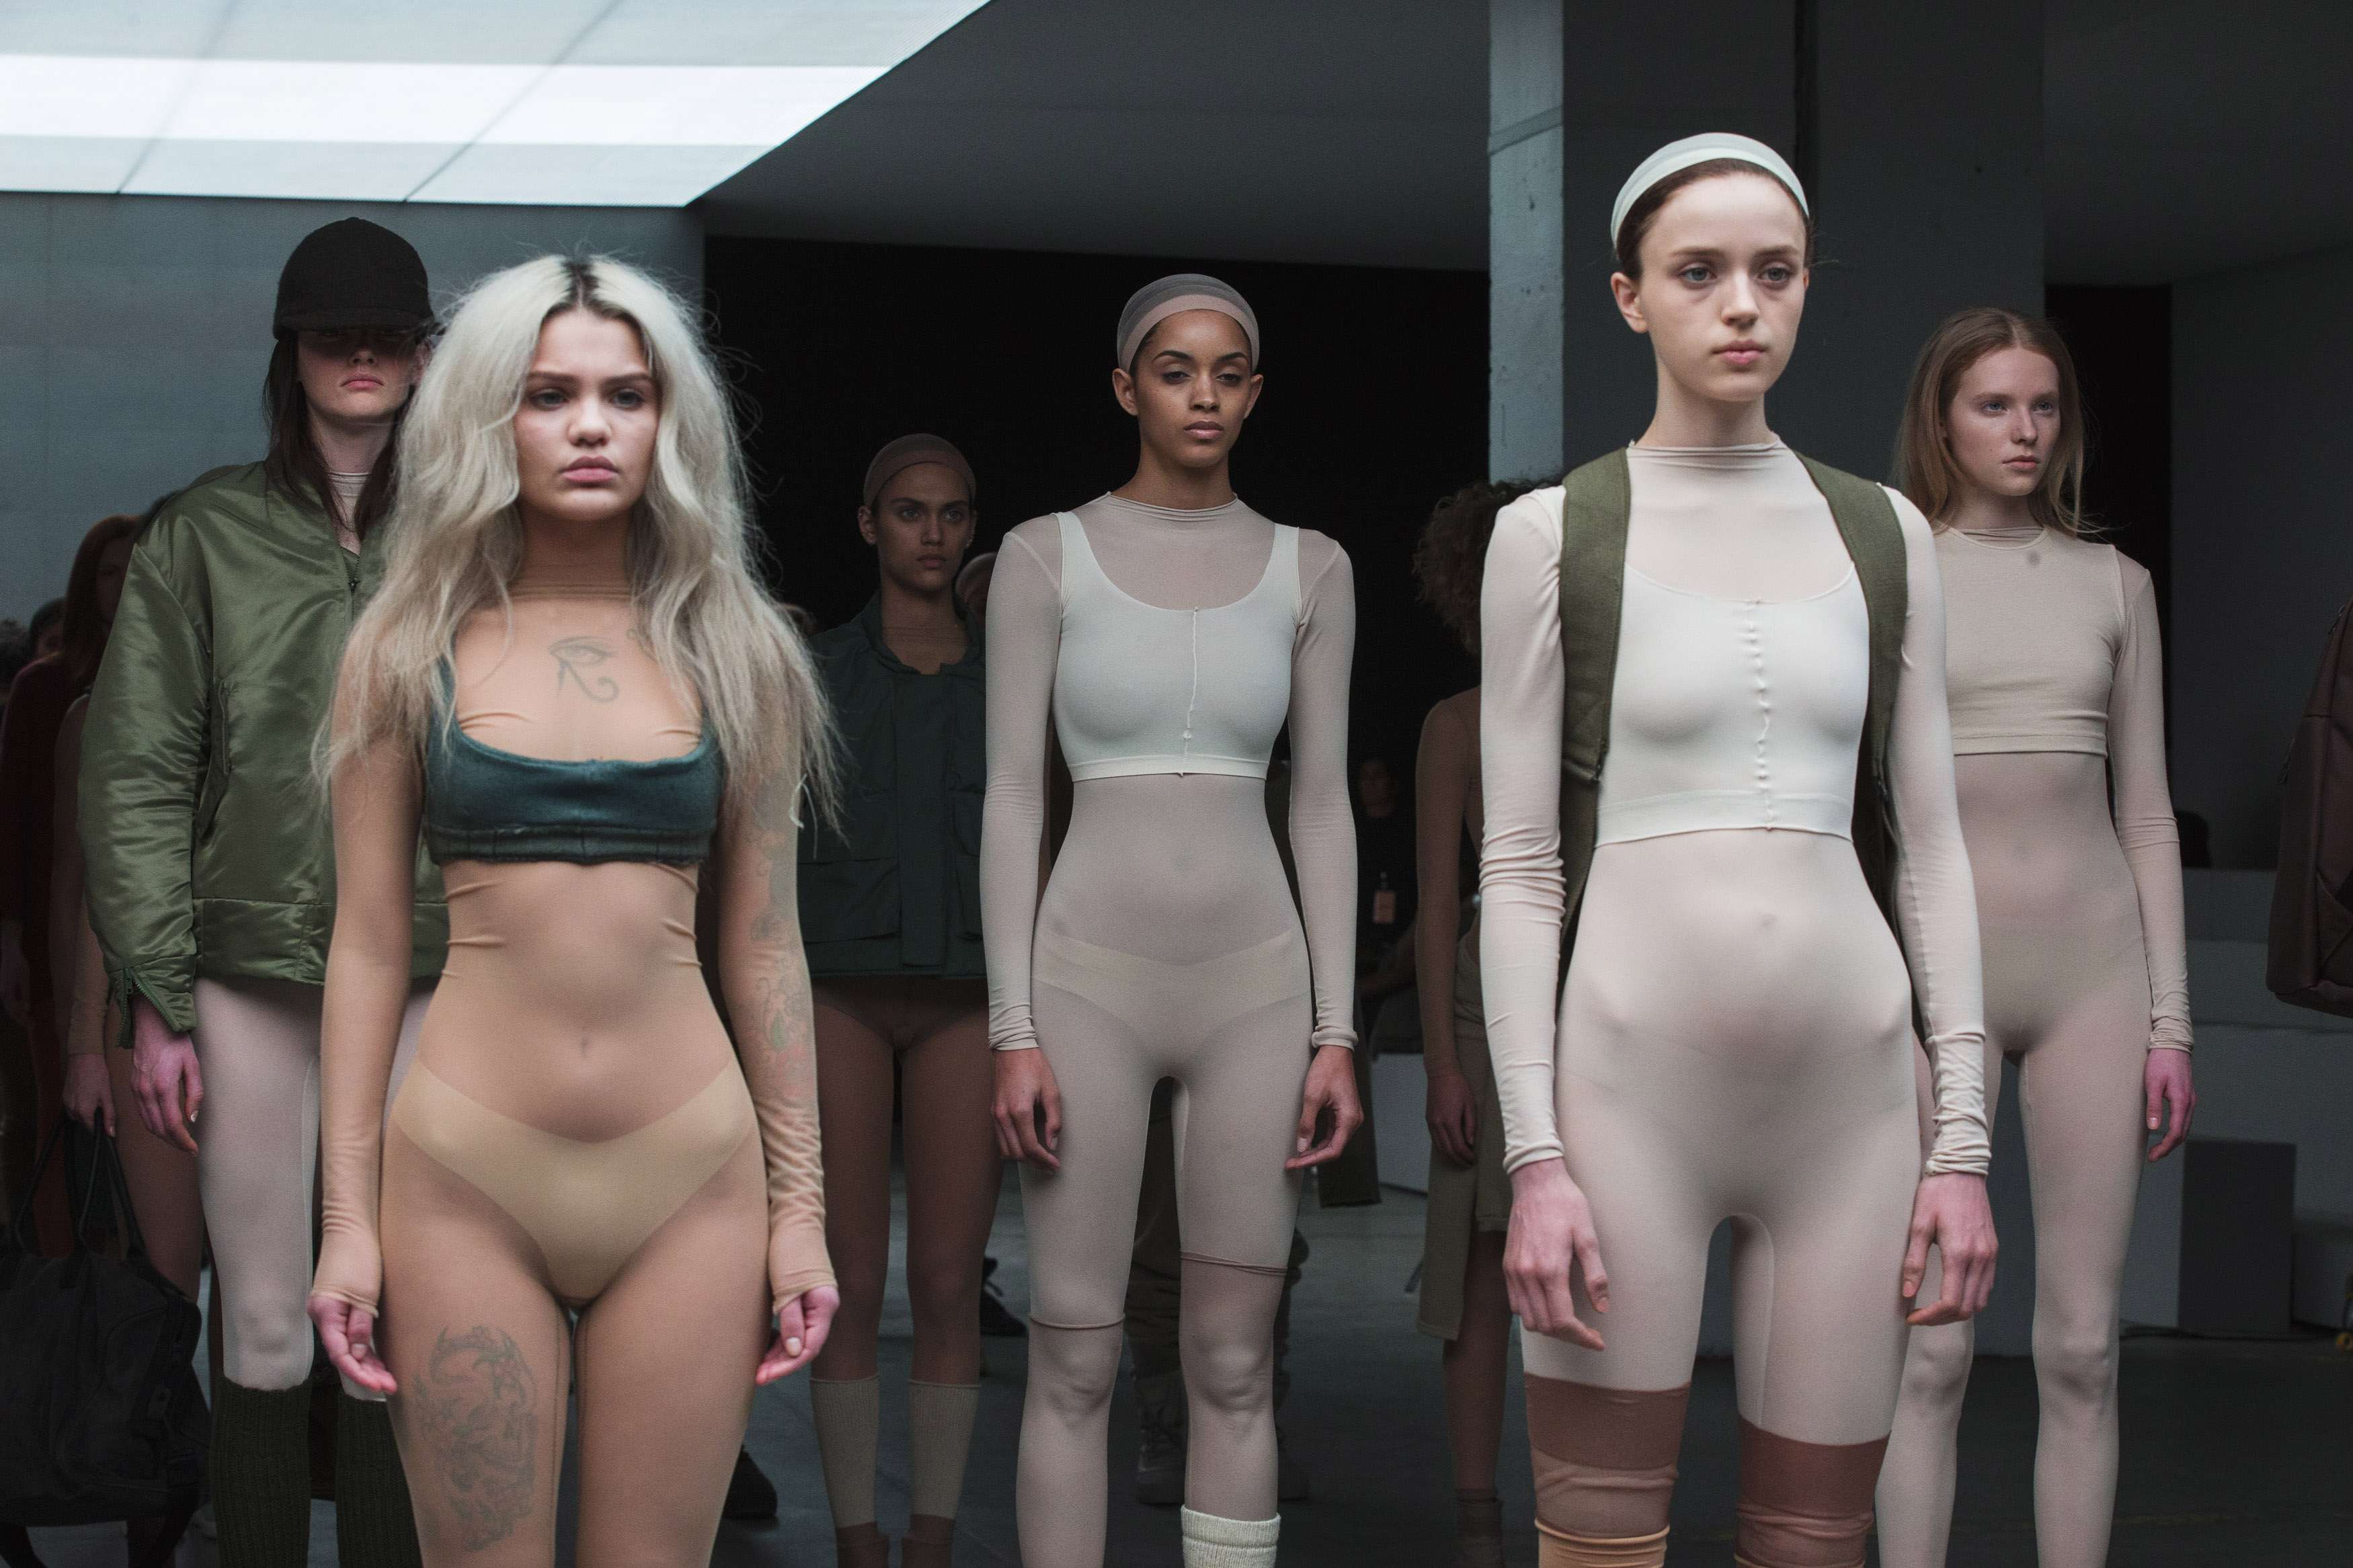 Creations from Kanye West's autumn/winter 2015 Adidas Original collection. Beige body stockings at times made the female models look like nearly naked Barbie dolls. Photo: Reuters